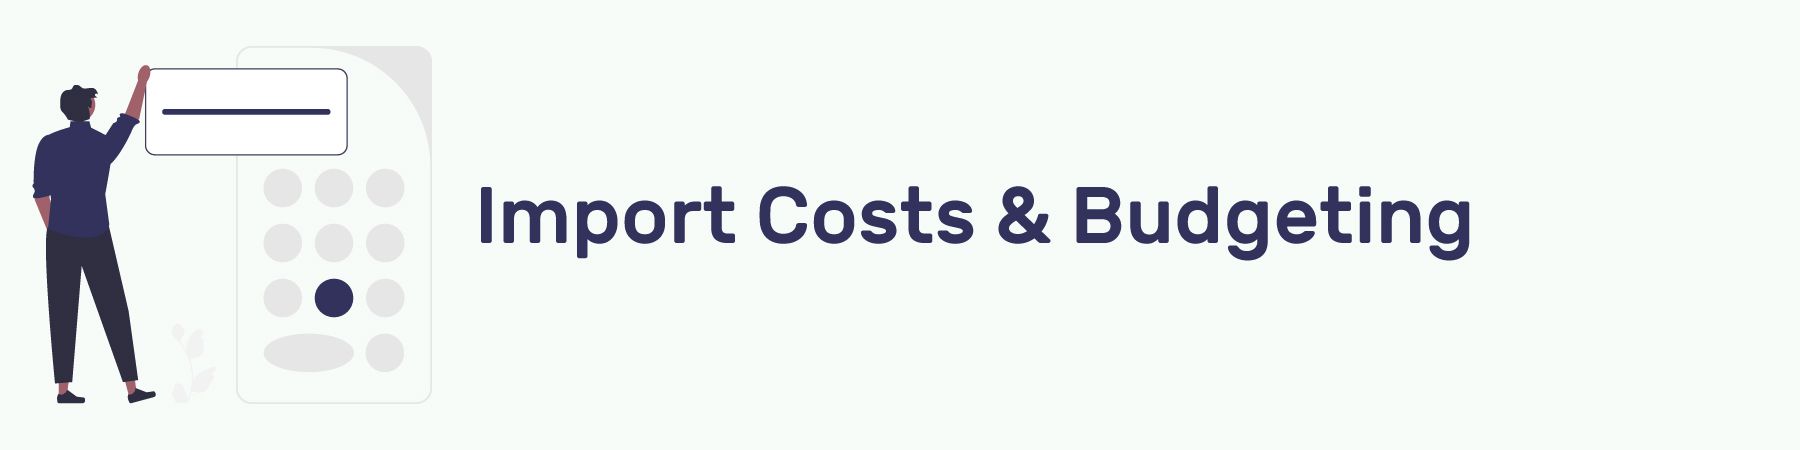 Import Costs and Budgeting Section Header